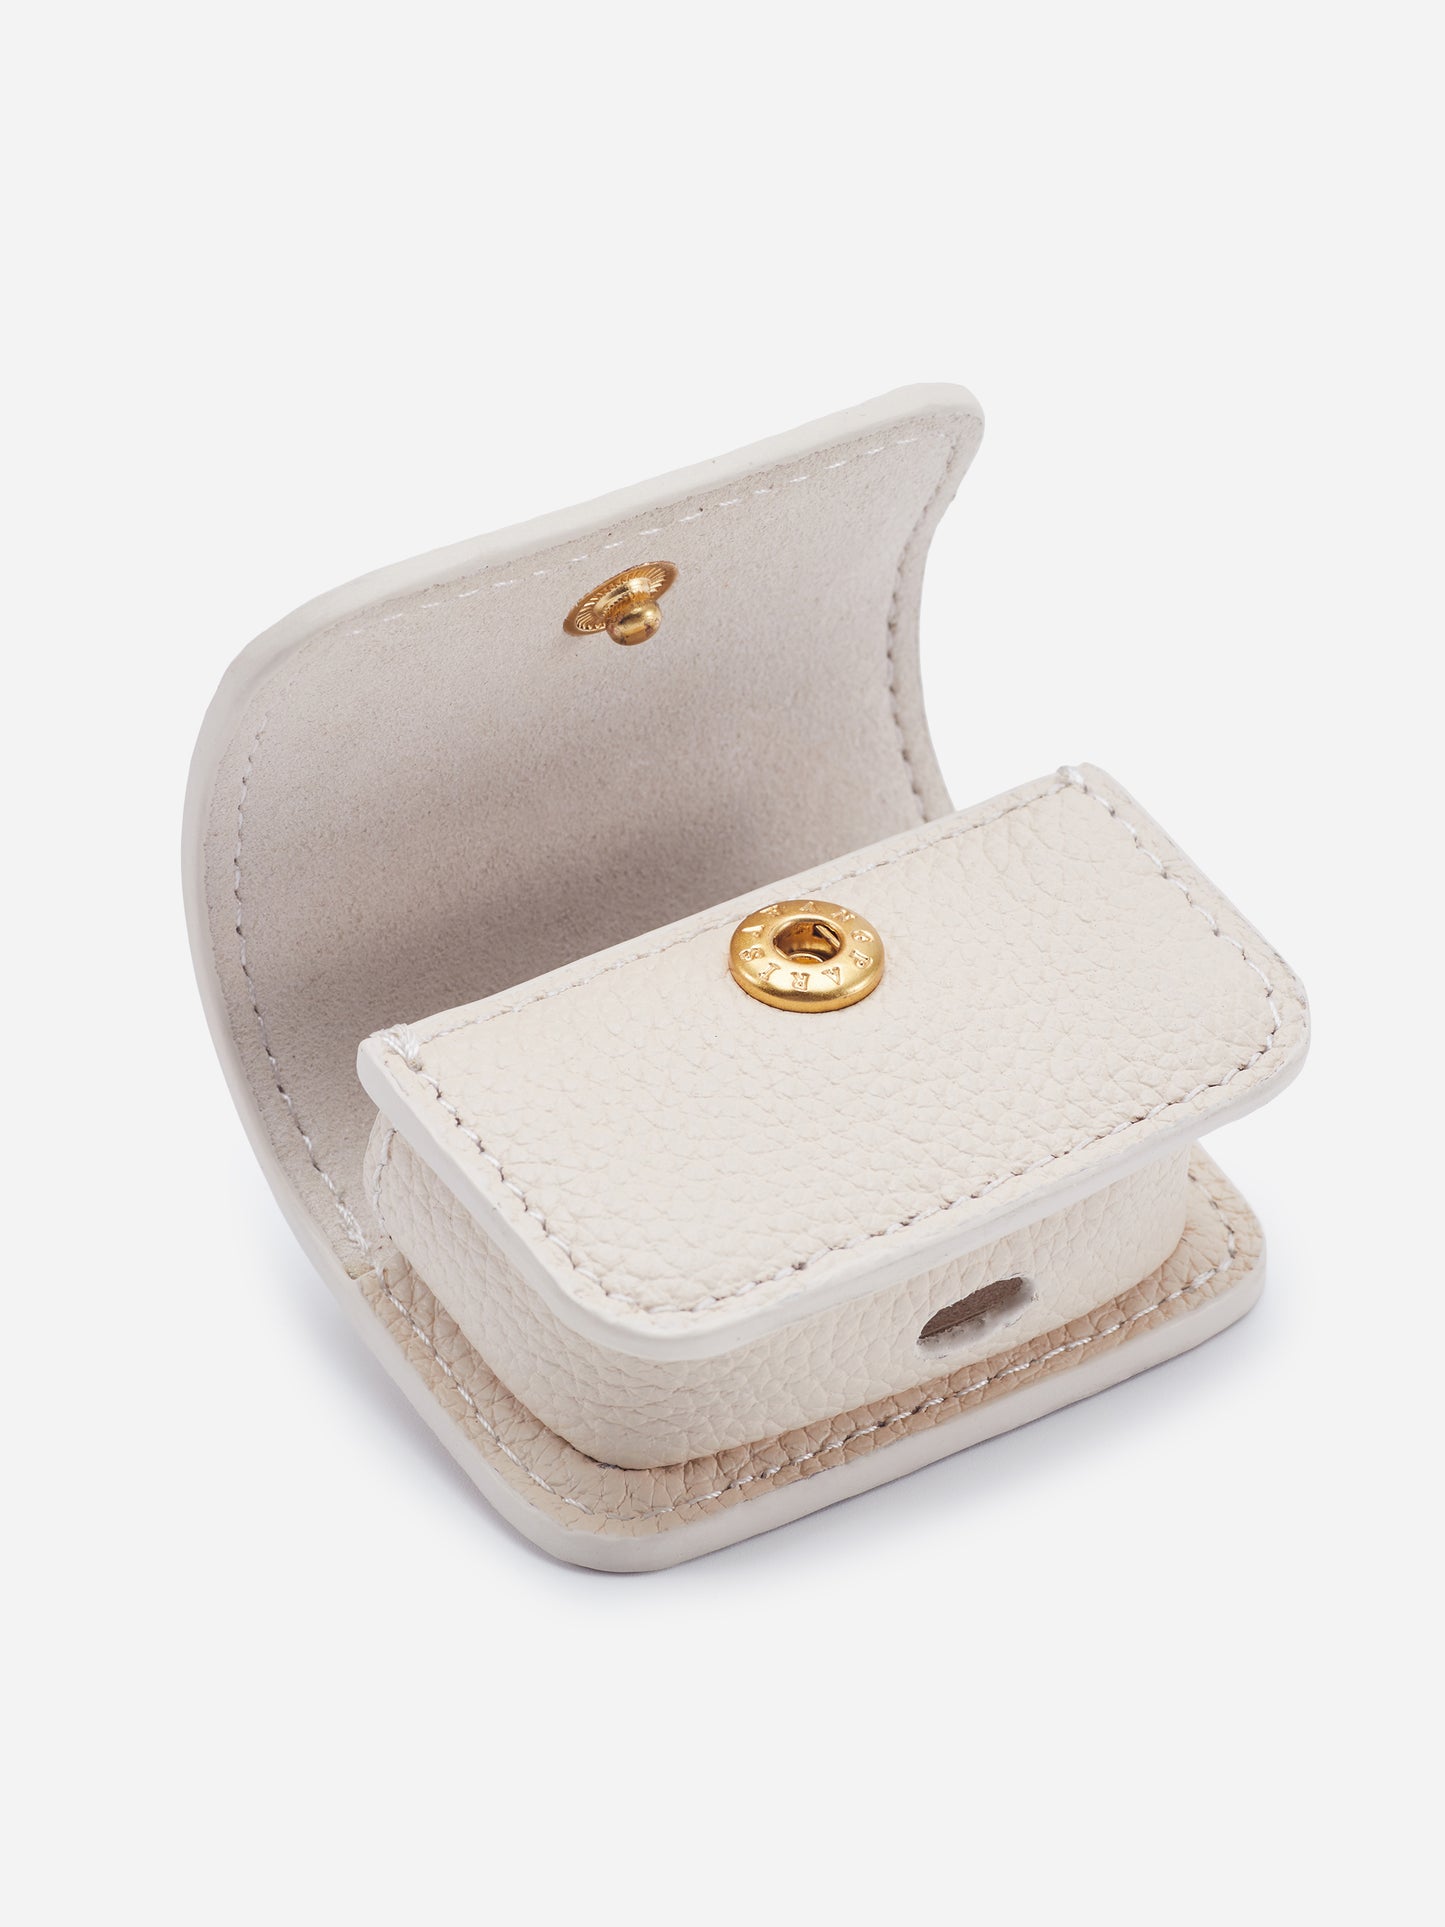 PW AirPods Pro Case in Cream | Parisa Wang | Featured